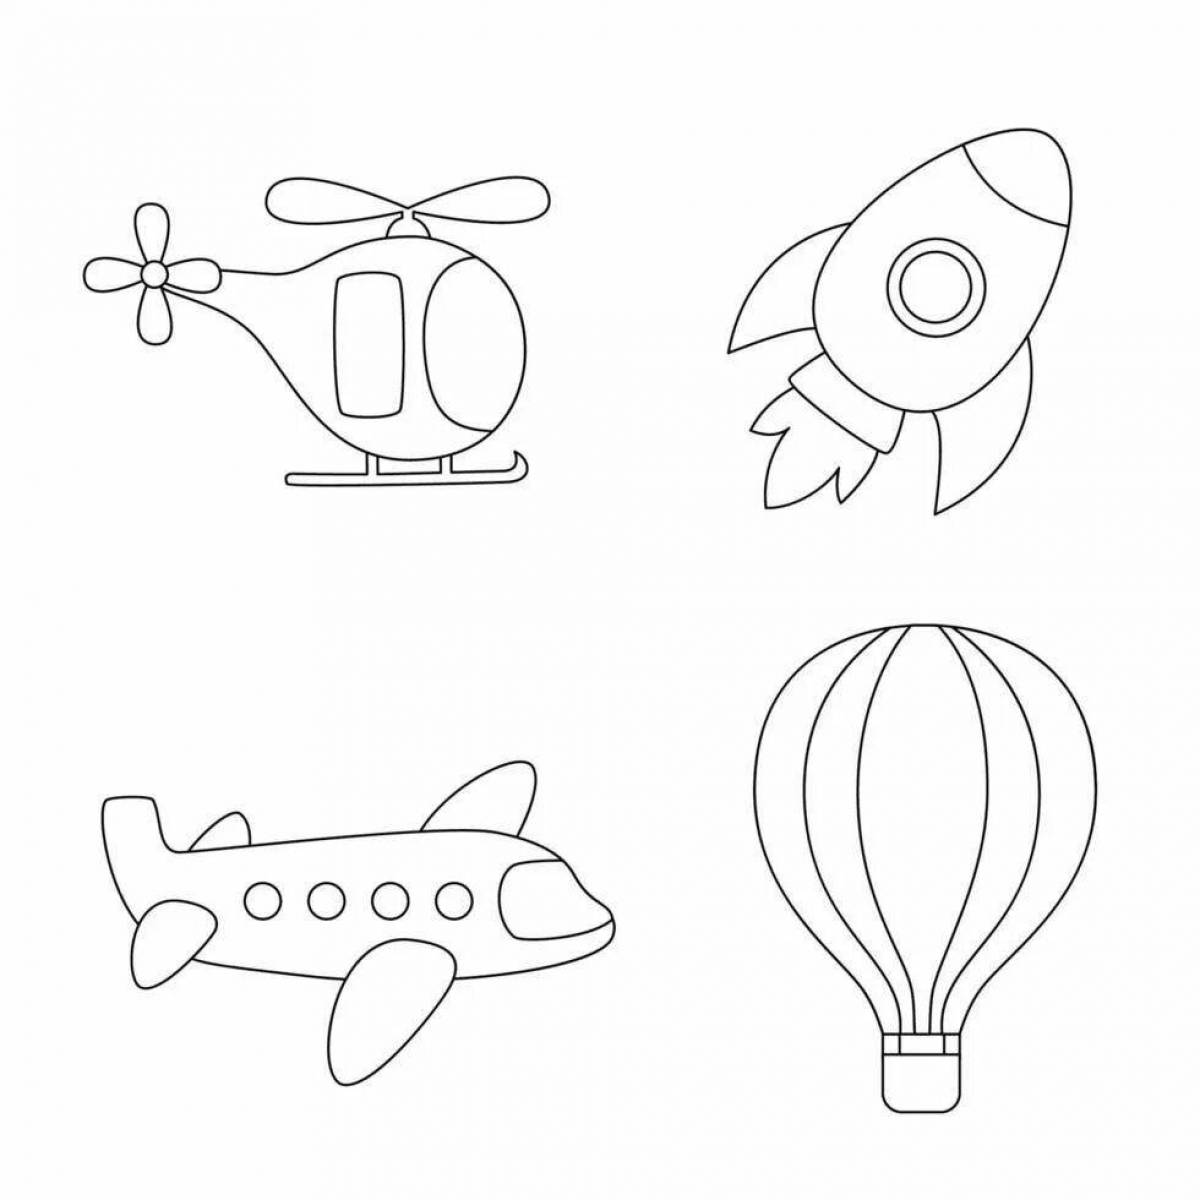 Incredible air transport coloring book for 6-7 year olds